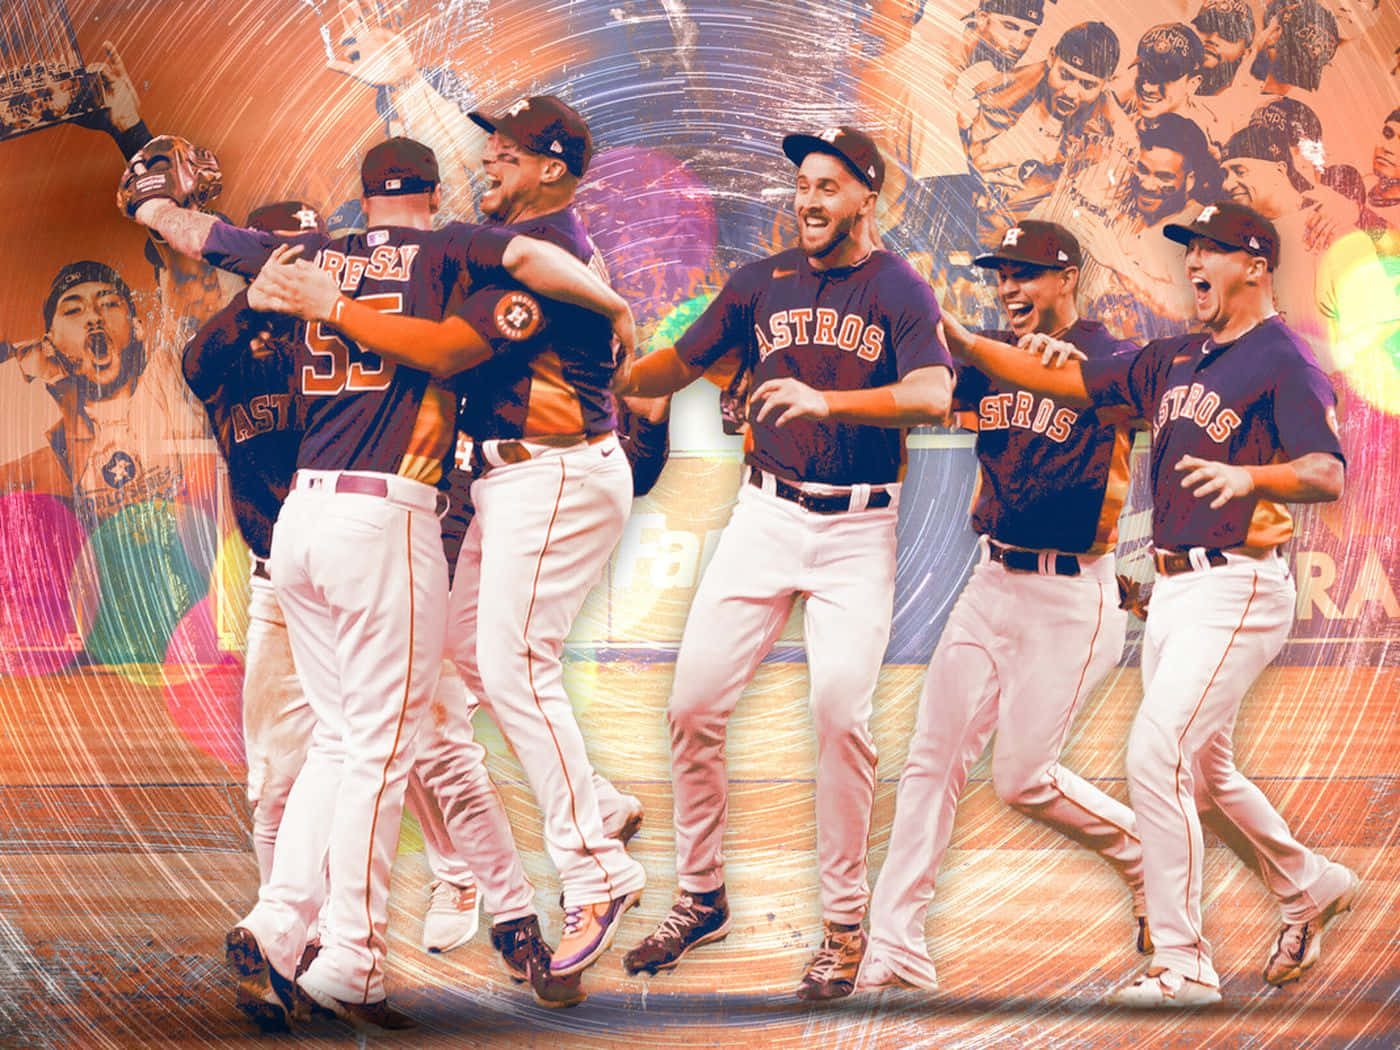 Download Astros Baseball Team in Action